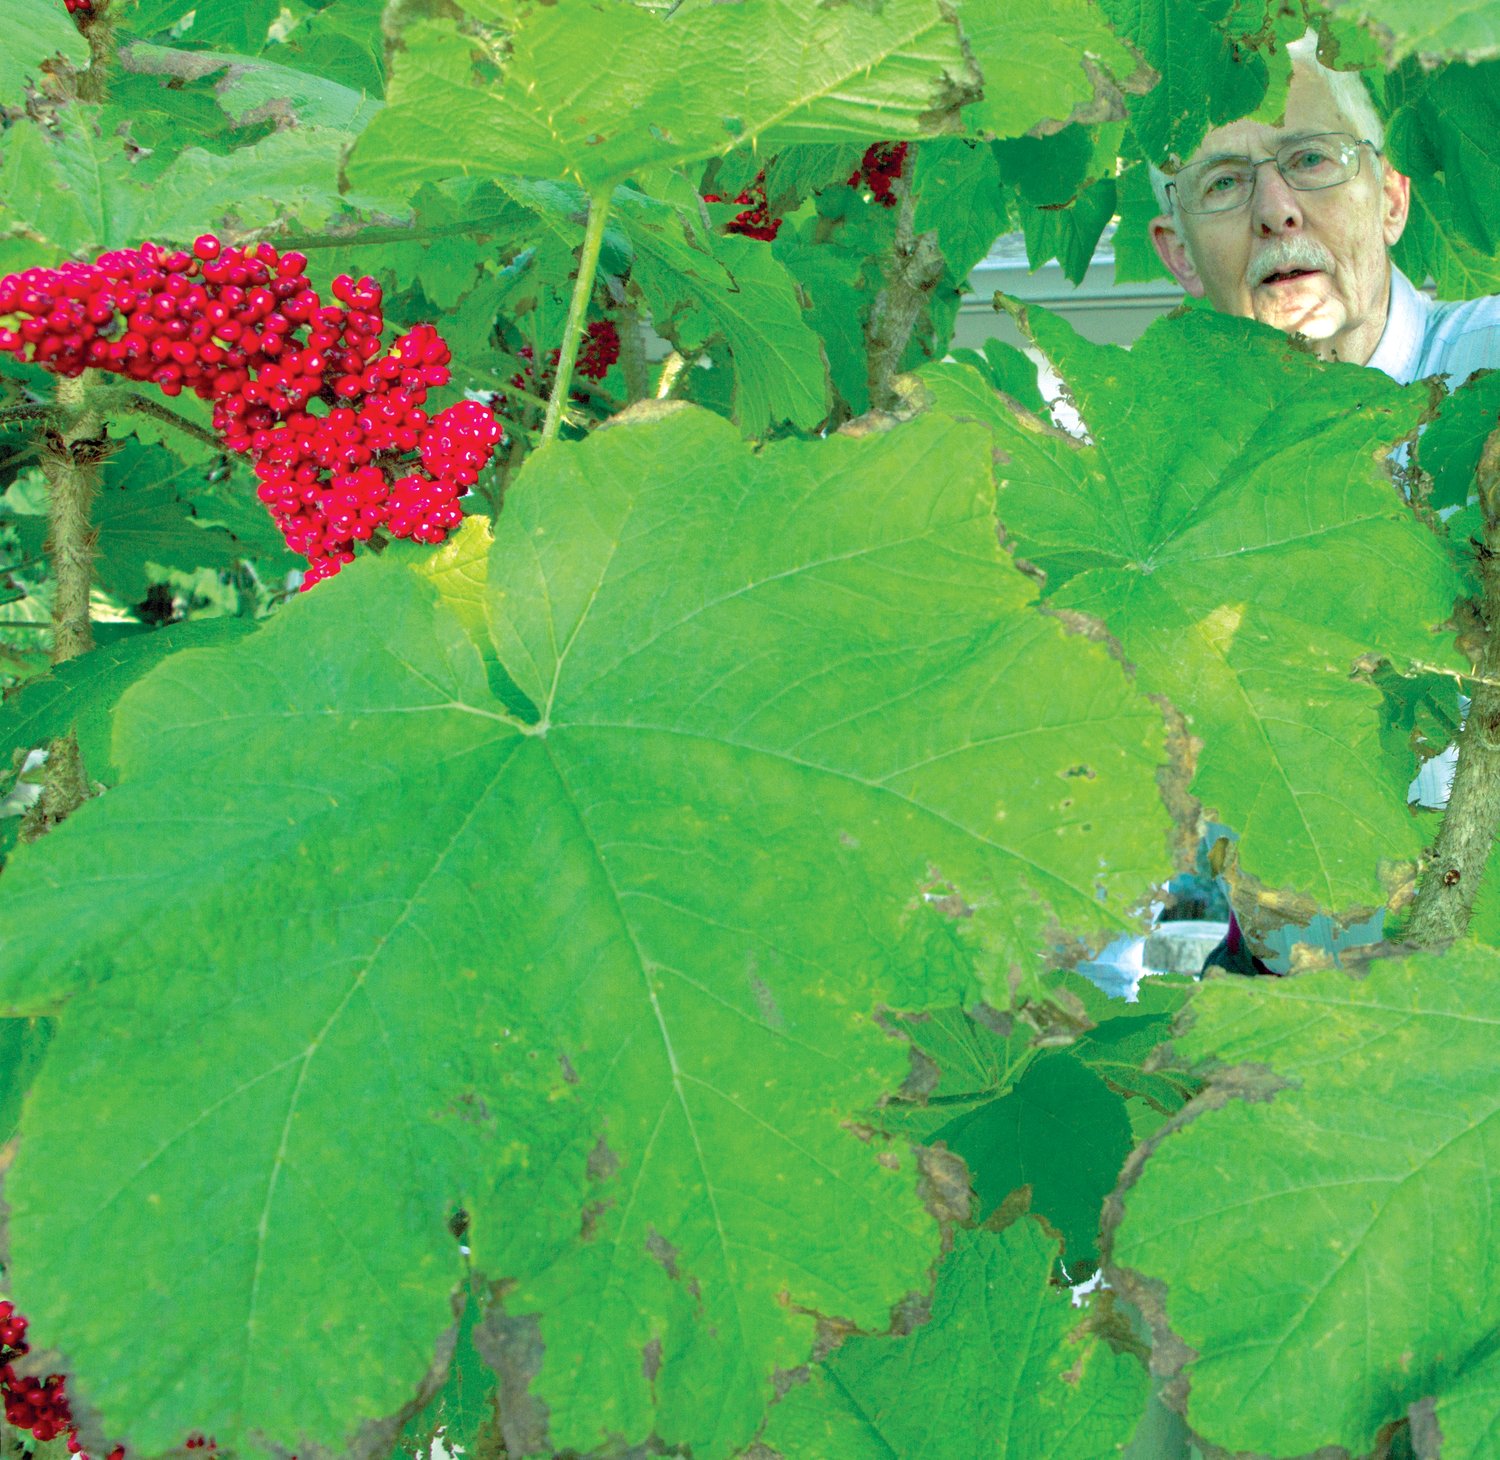 The plant has distinctive large leaves and red berries, along with massive thorns.